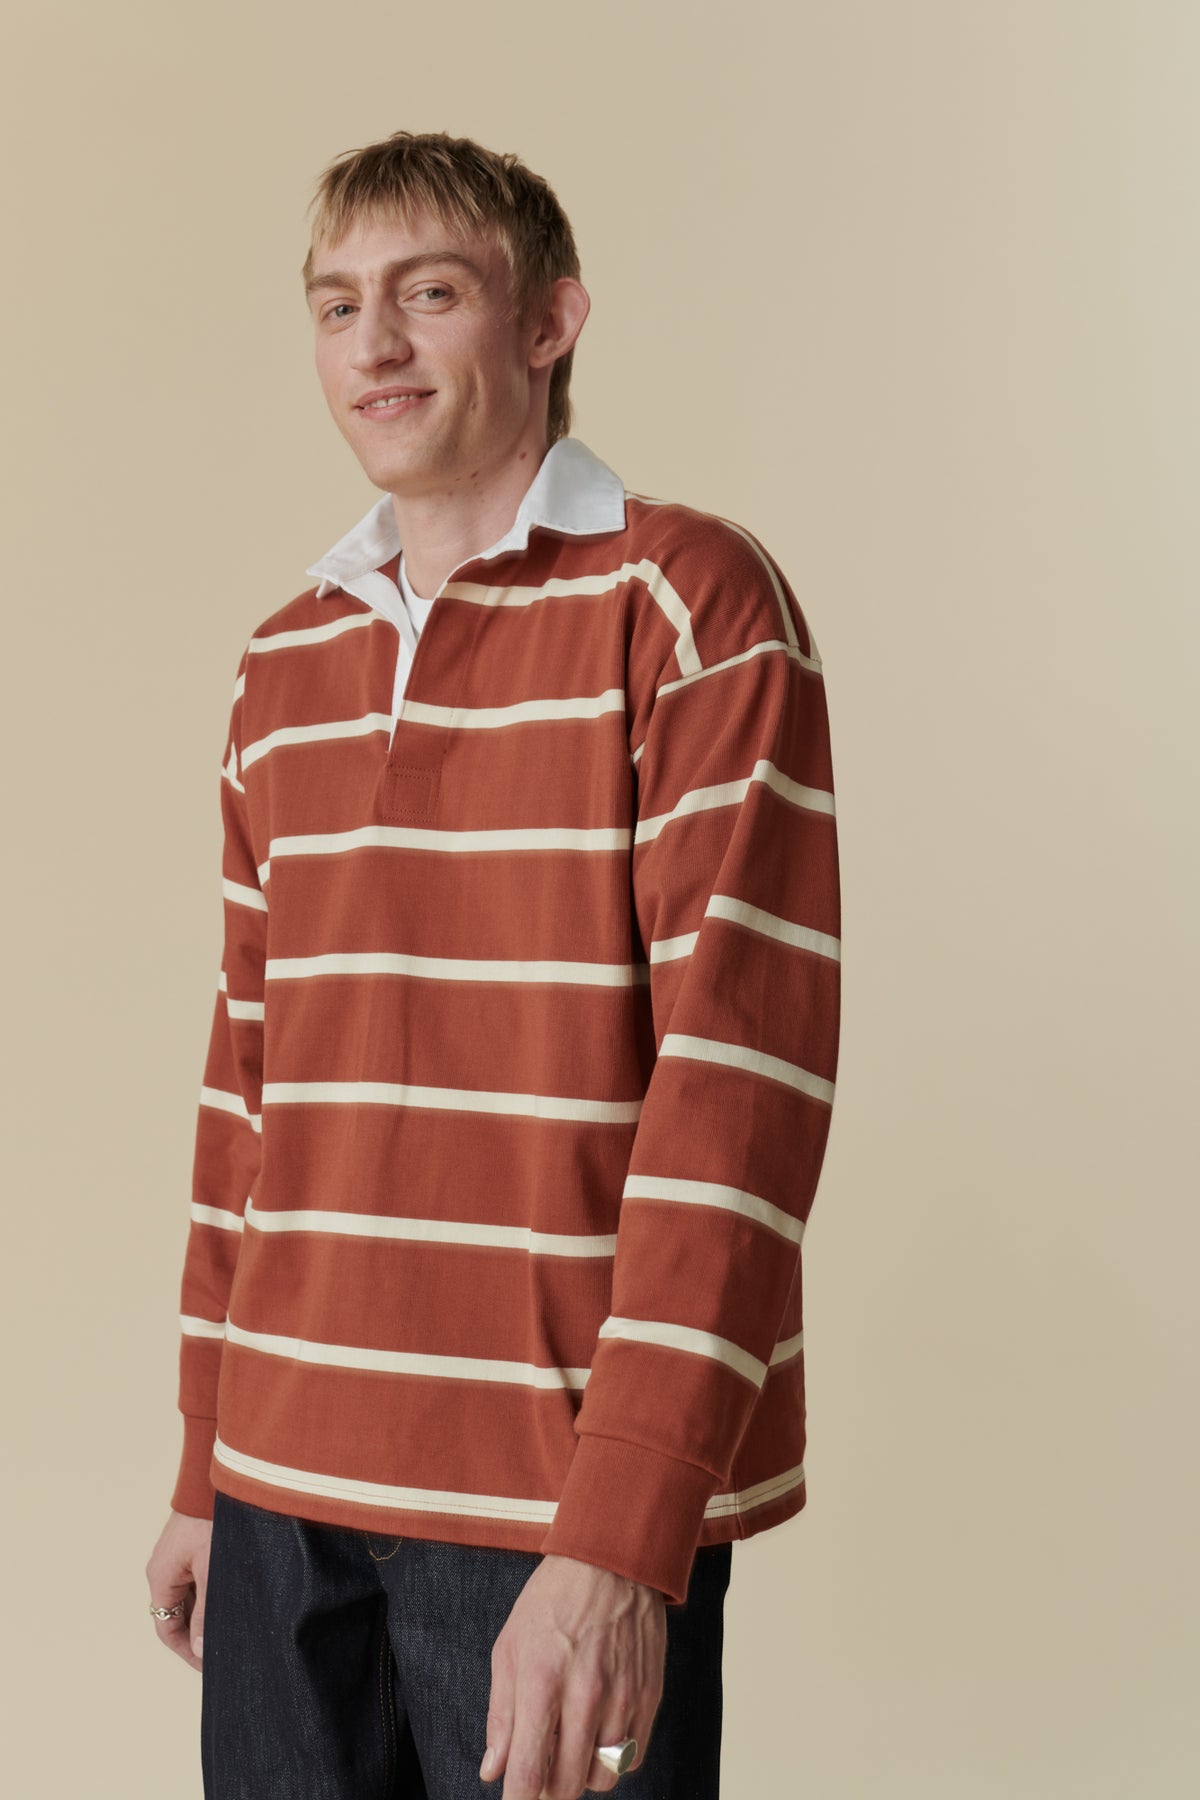 
            Thigh up shot of smiley, white male wearing rugby shirt in cinnamon and ecru stripe